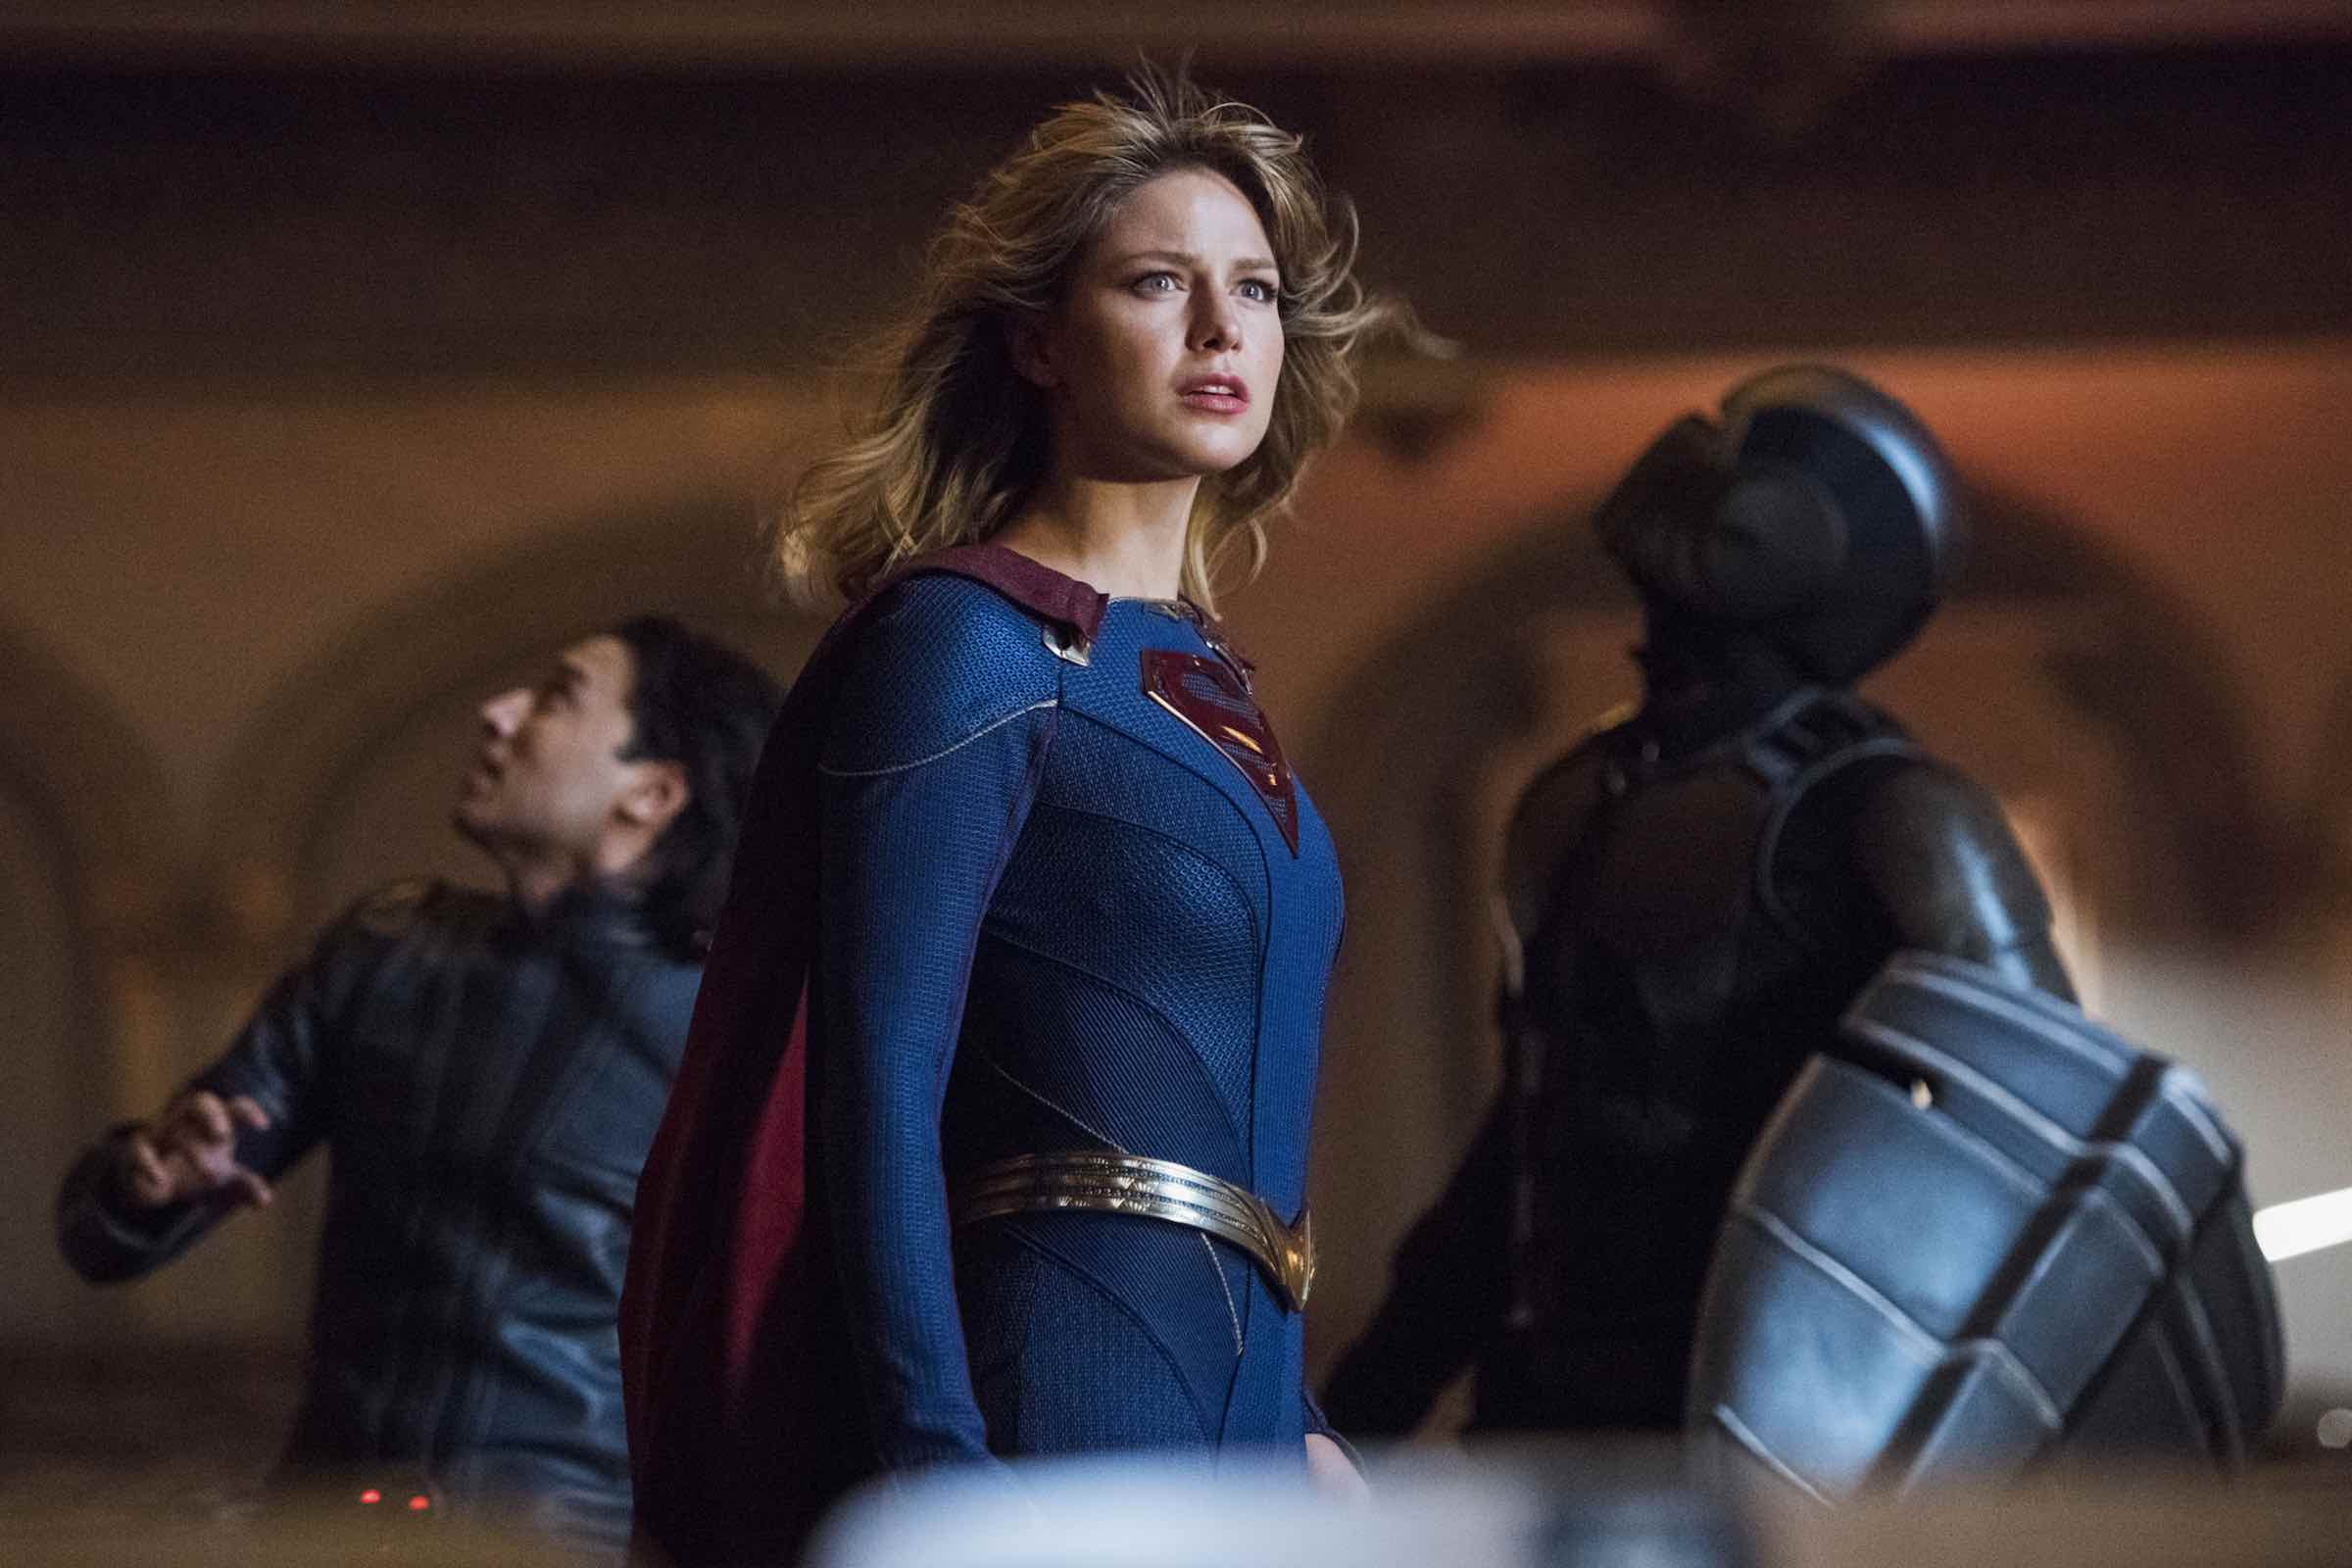 We have some post-Crisis news for The CW’s 'Supergirl'. With the latest news and set photos, we have some more information to share.